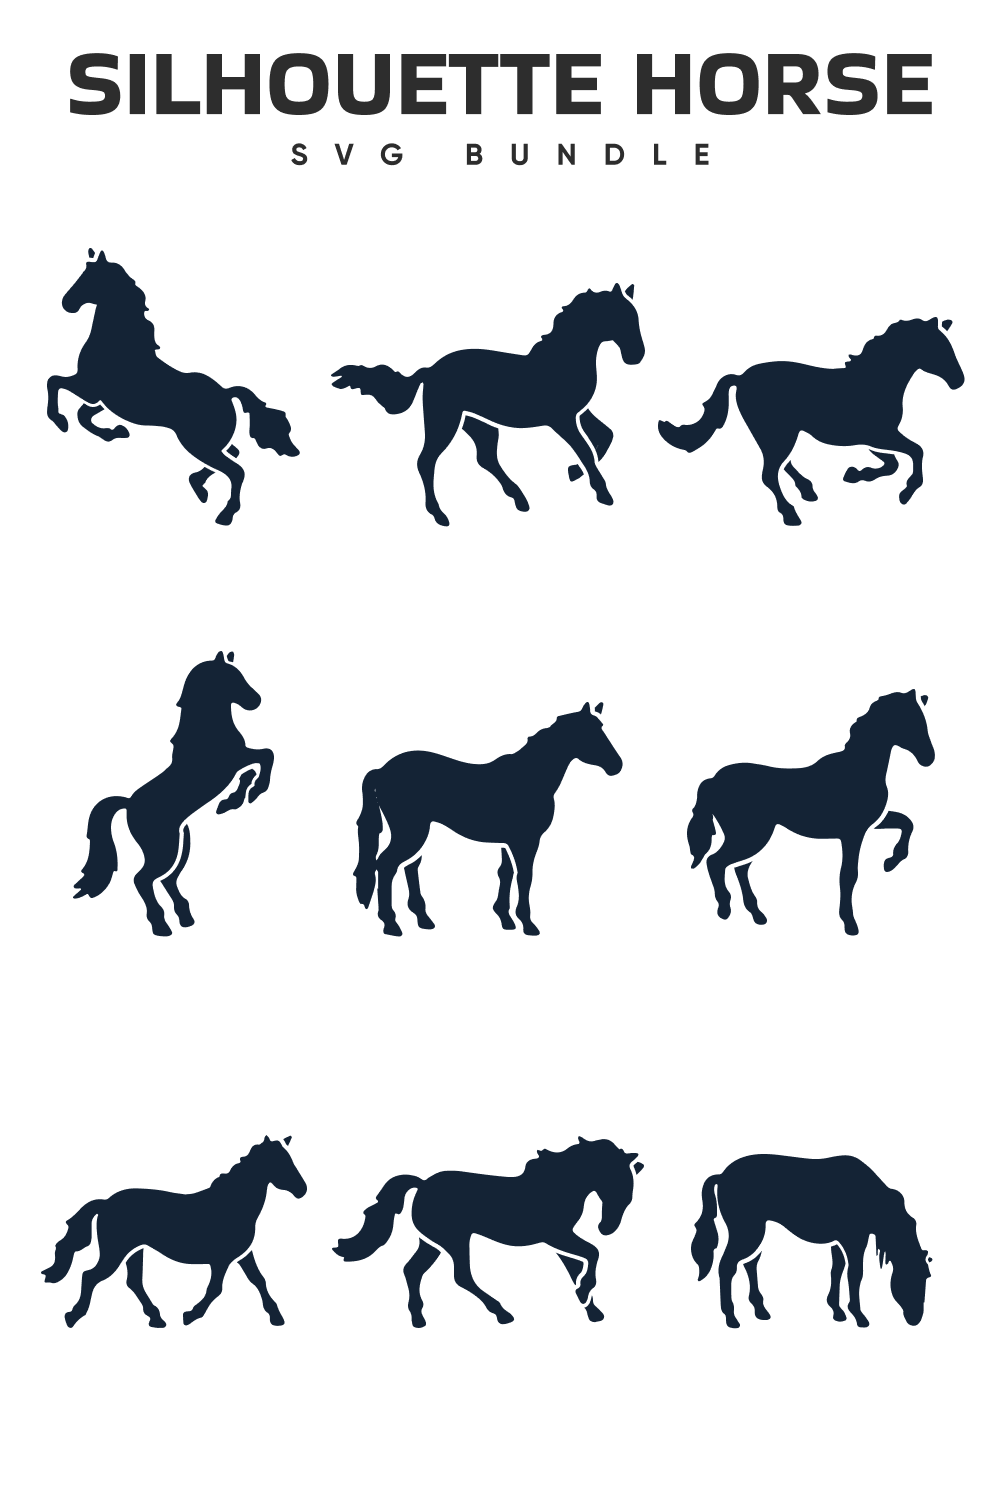 The silhouettes of horses are shown on a white background.